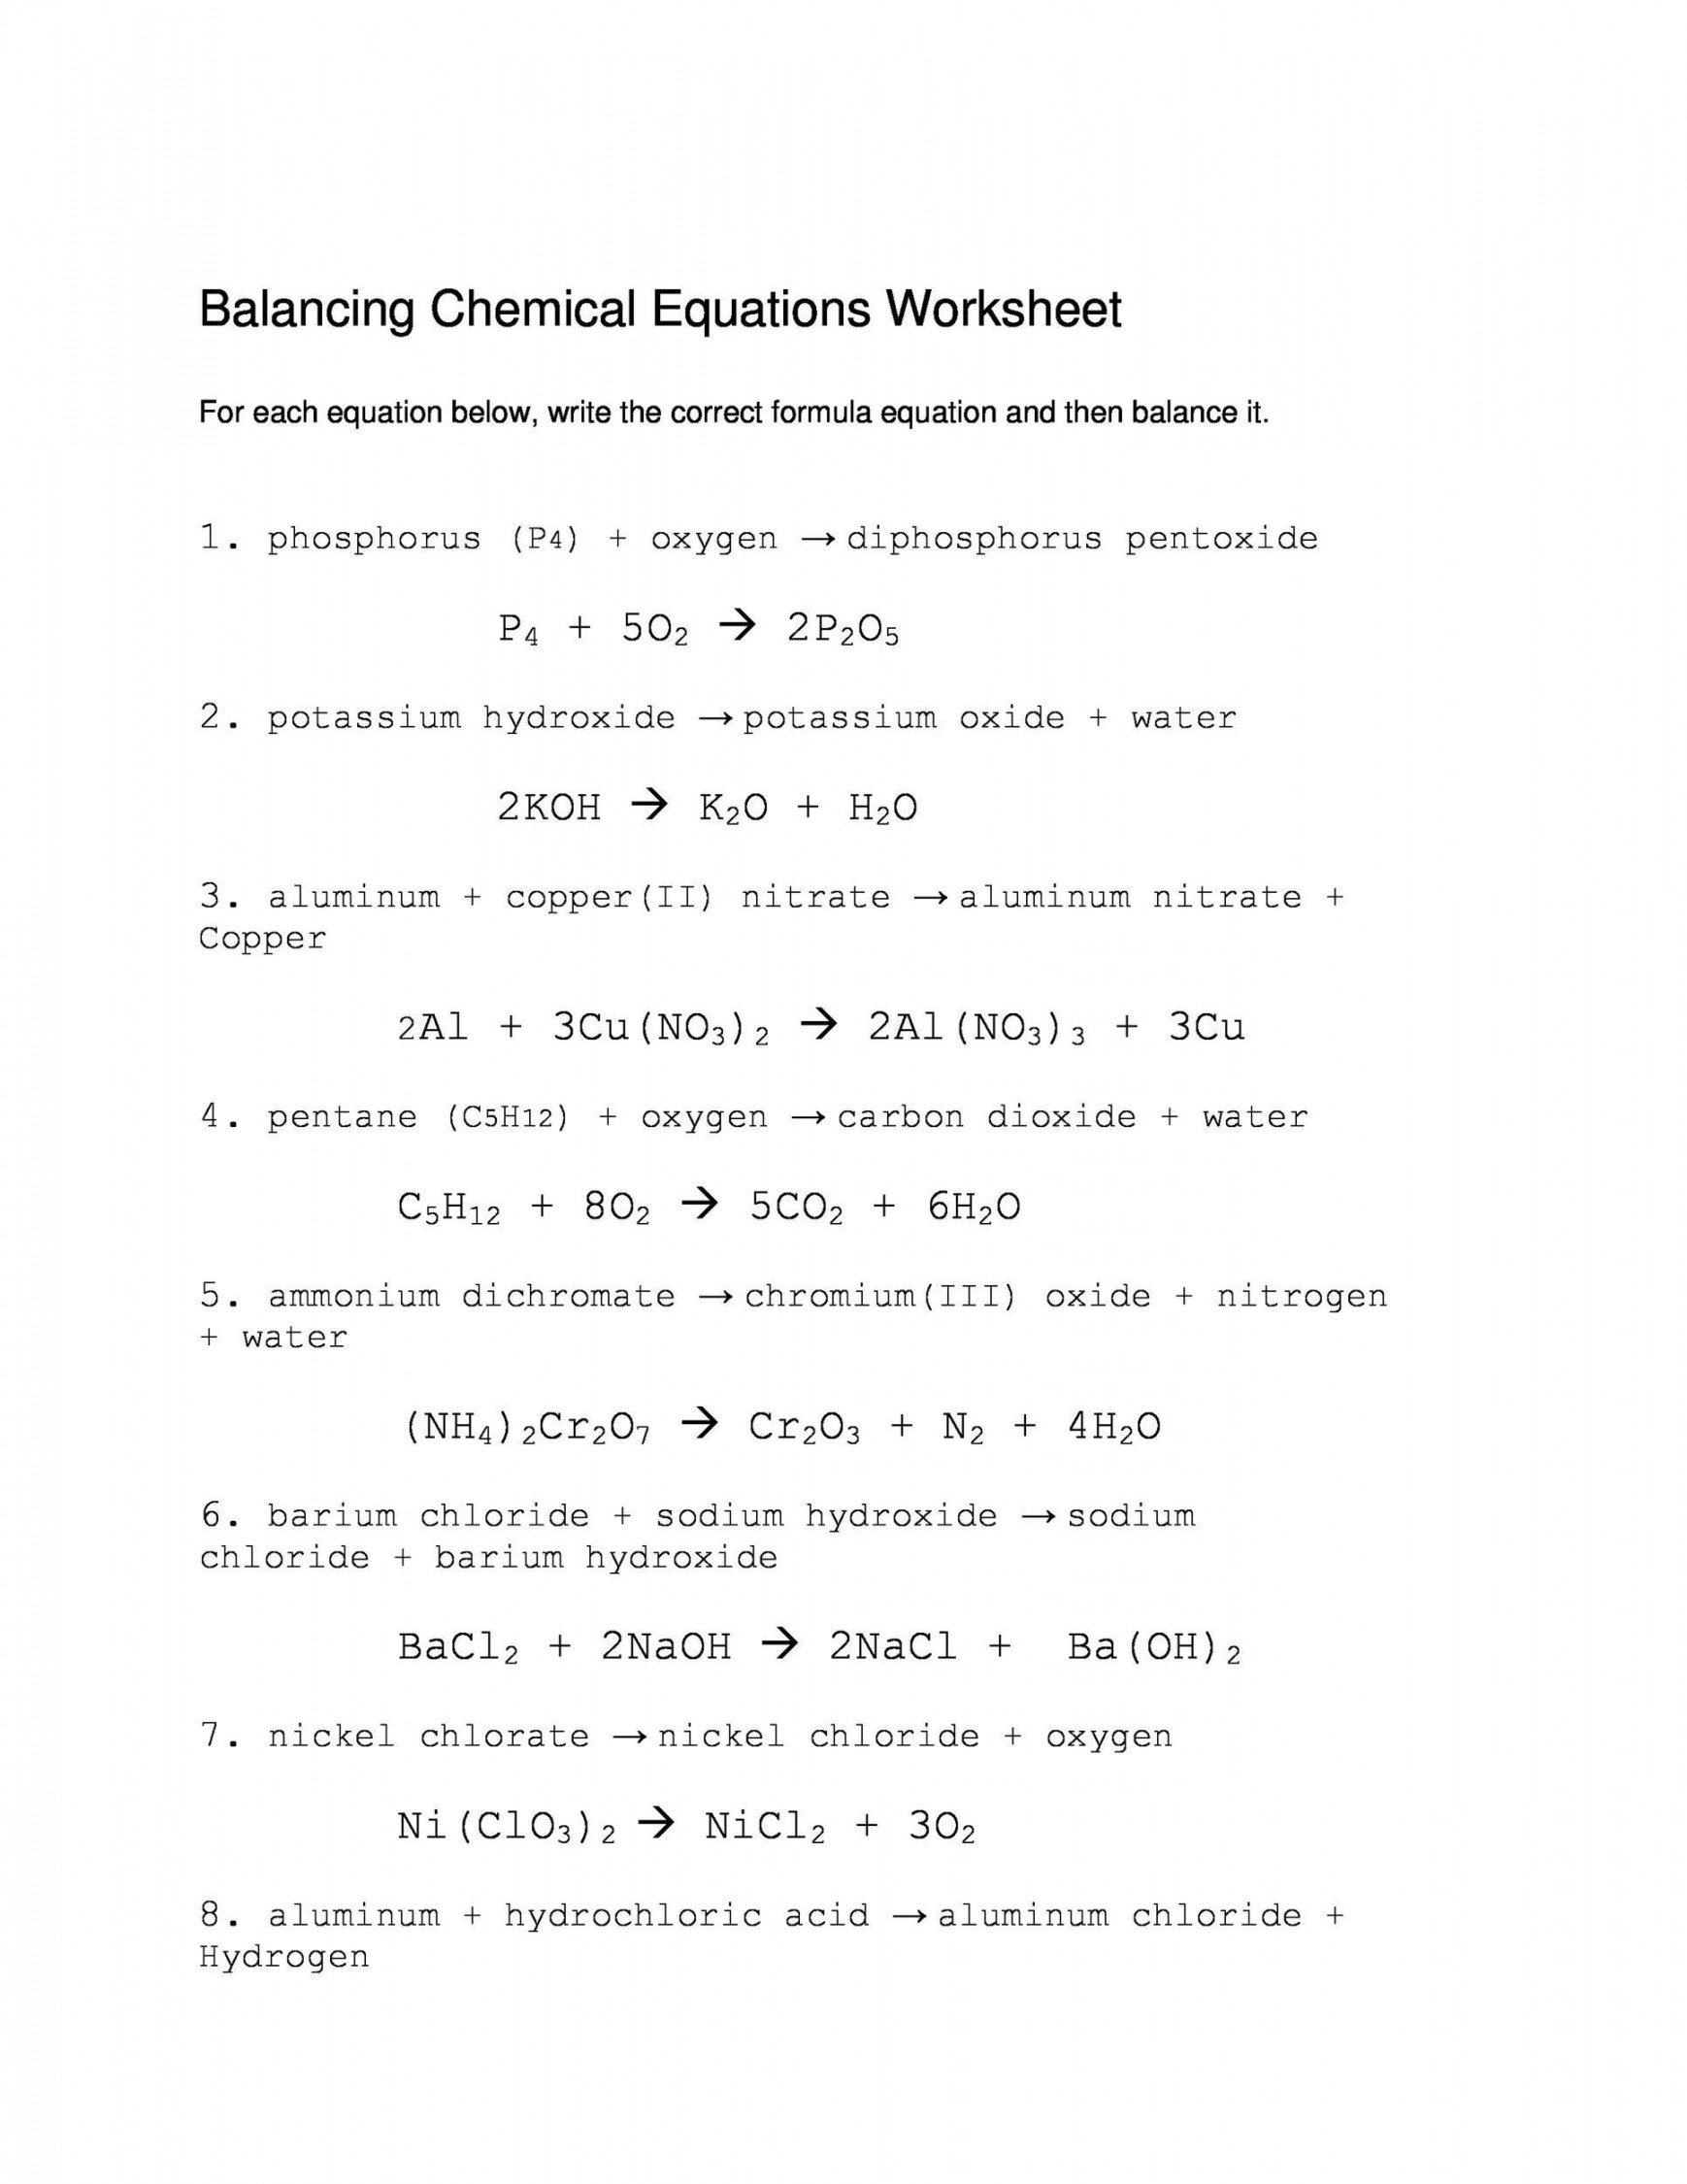 Balancing Chemical Equations Worksheets [with Answers]